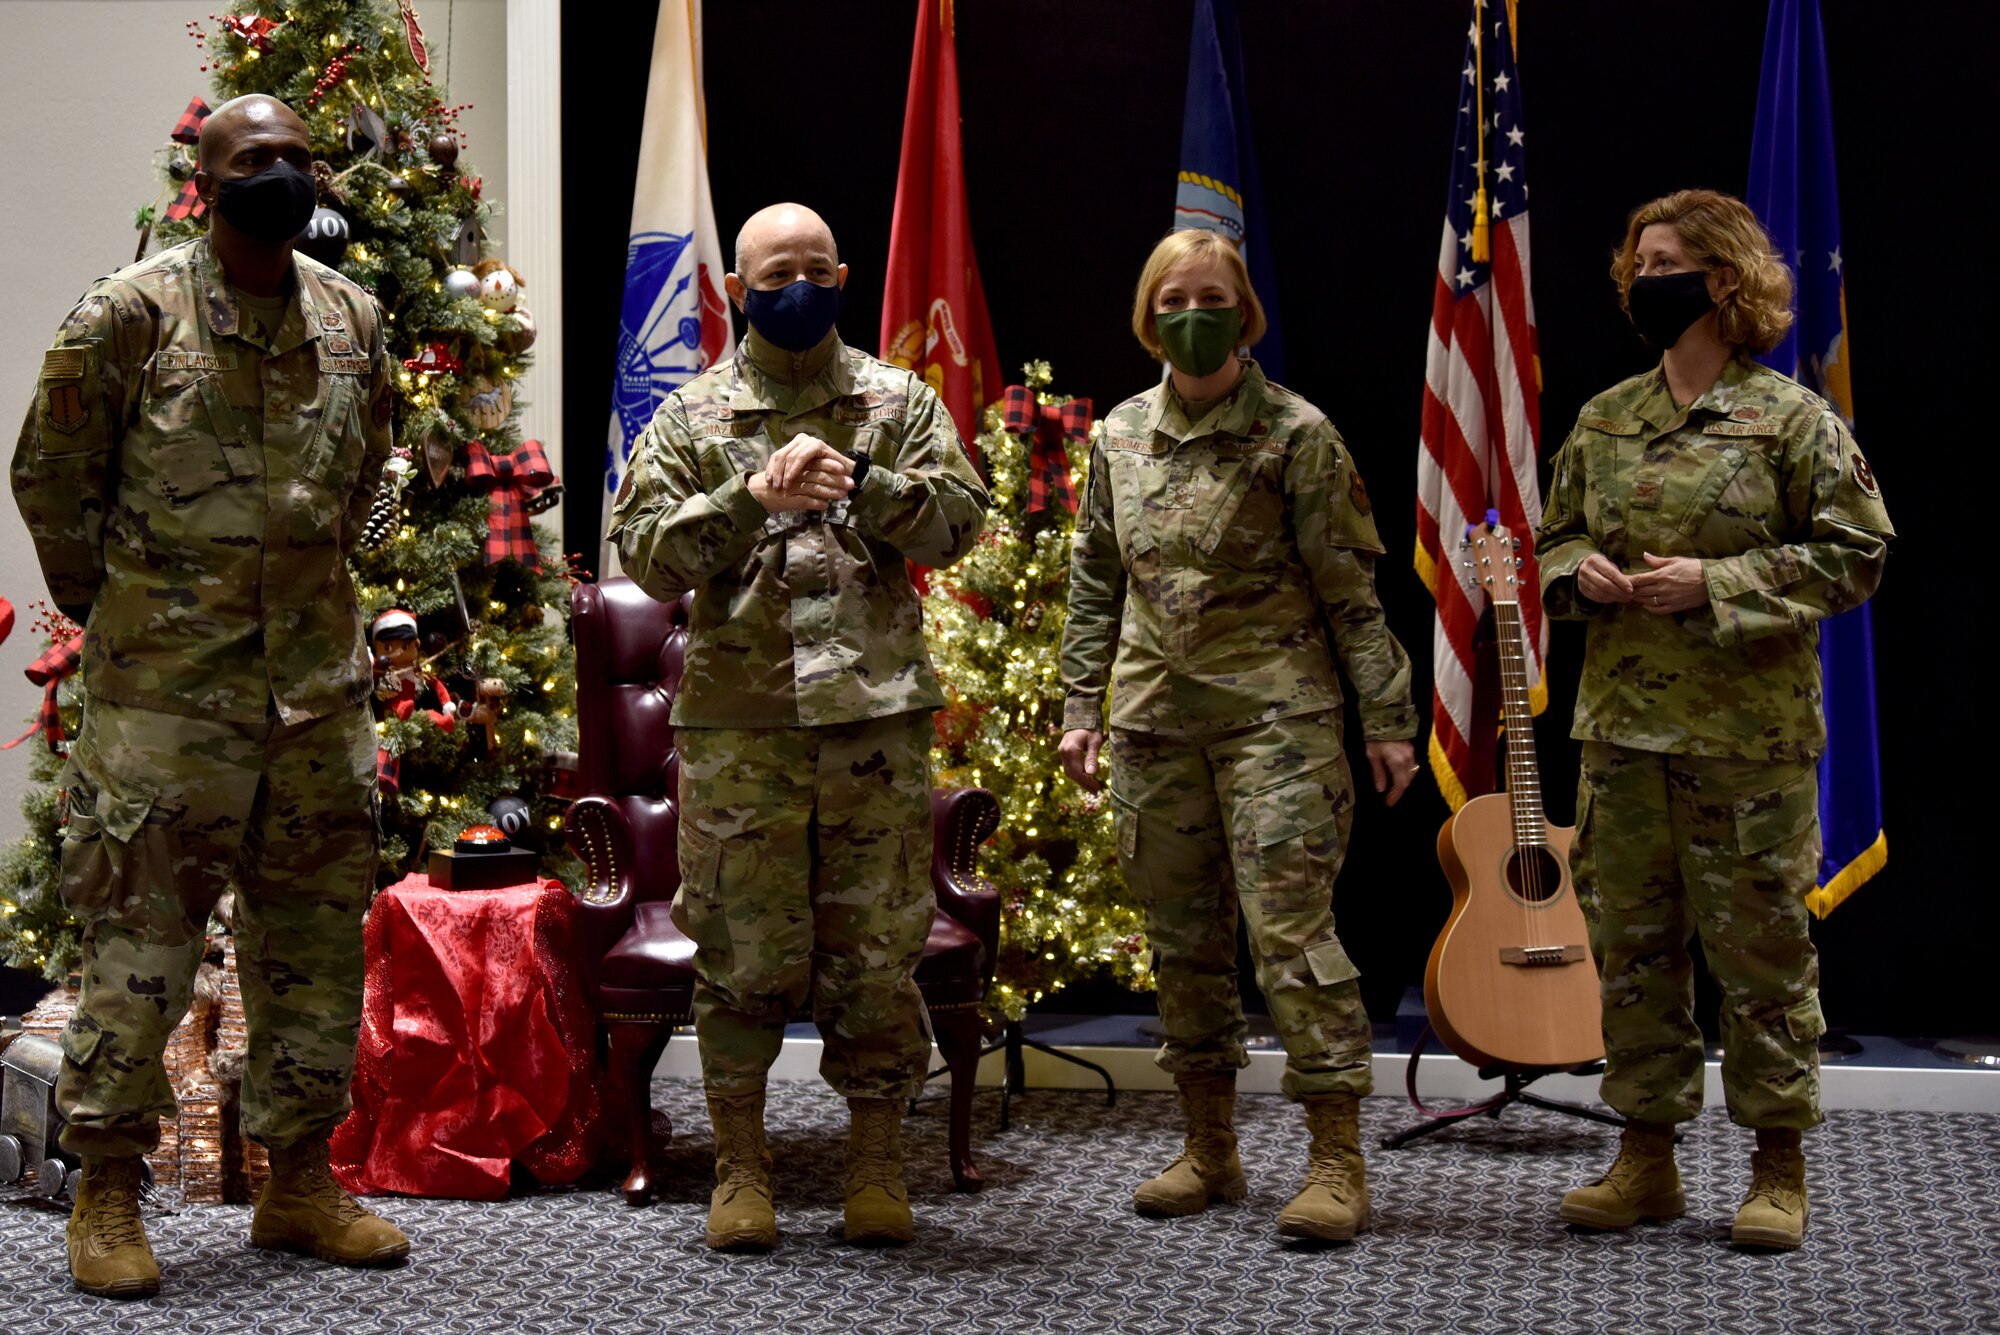 Goodfellow senior leaders a deliver holiday greetings at the Event Center on Goodfellow Air Force Base, Texas, Dec. 4, 2020. After delivering the holiday message the leaders gave Col. Andres Nazario, 17th Training Wing commander, a countdown to light the Christmas tree. (U.S. Air Force photo by Staff Sgt. Seraiah Wolf)